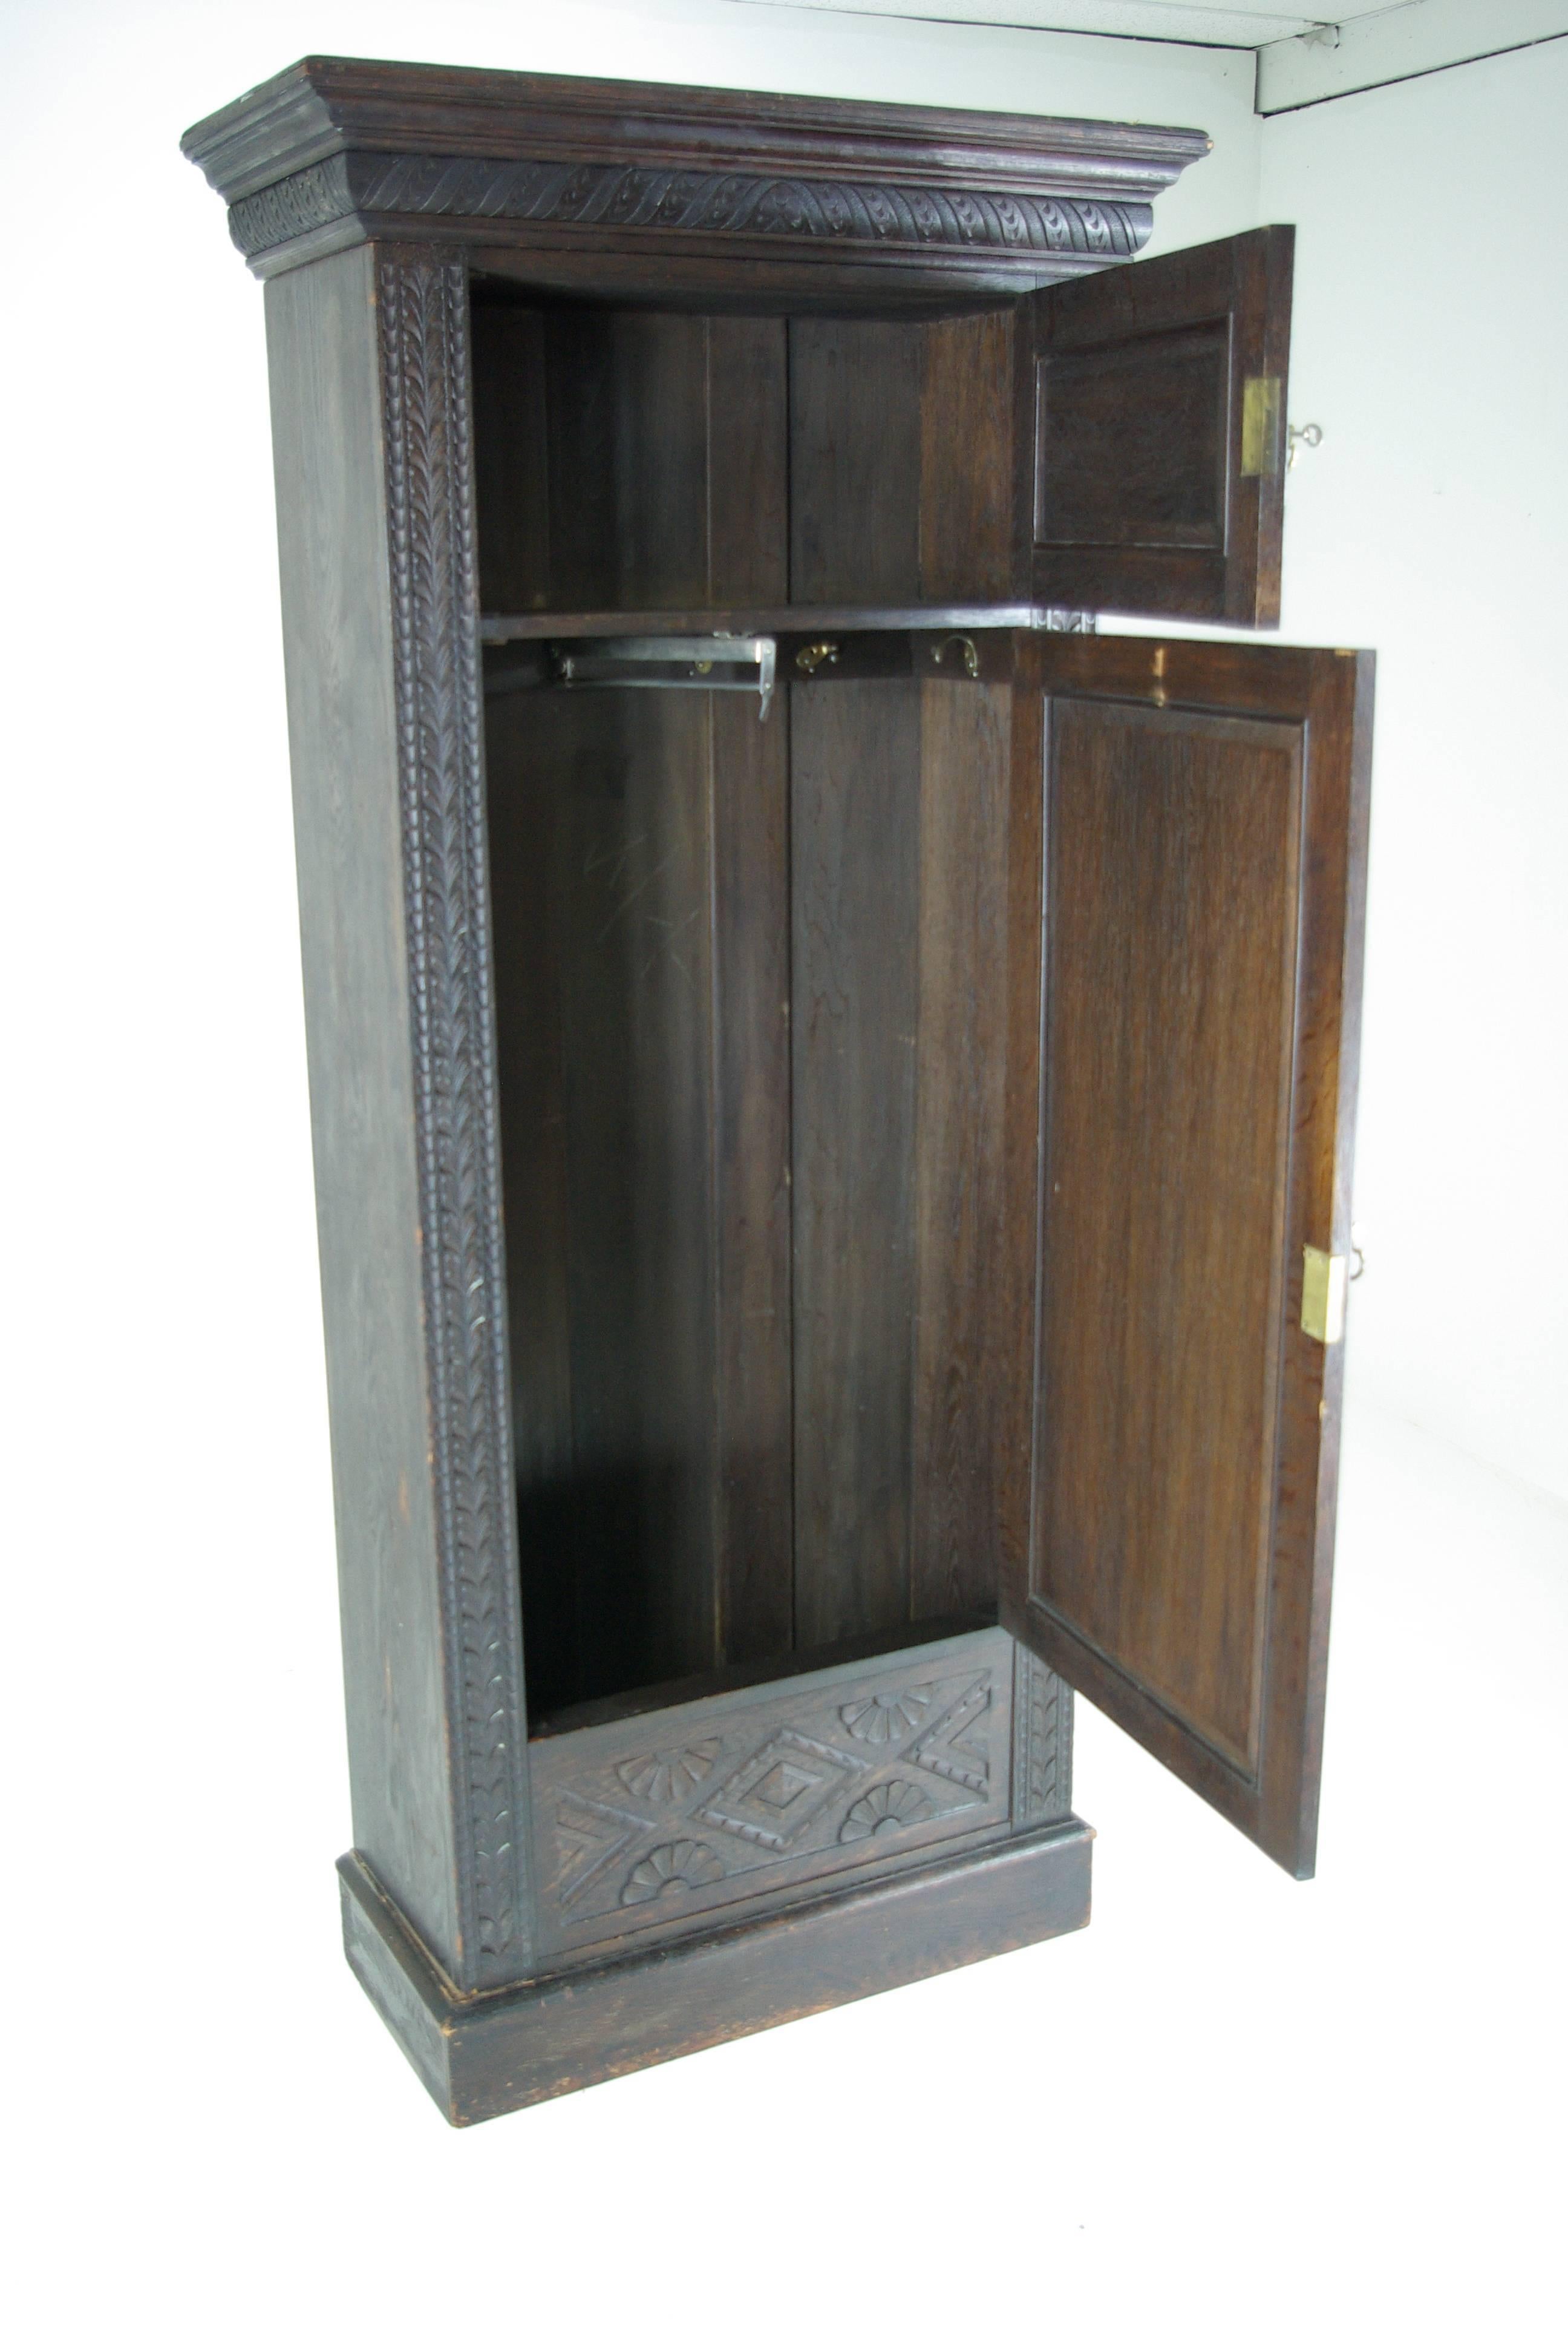 Scotlan, 1880.
All solid oak construction.
Dark oak finish,
carved cornice,
carved hatbox cupboard.
Heavily carved single door.
Fitted with hanging rod and five hooks.
Excellent condition.
Separates into three pieces.

$1250

Our item B